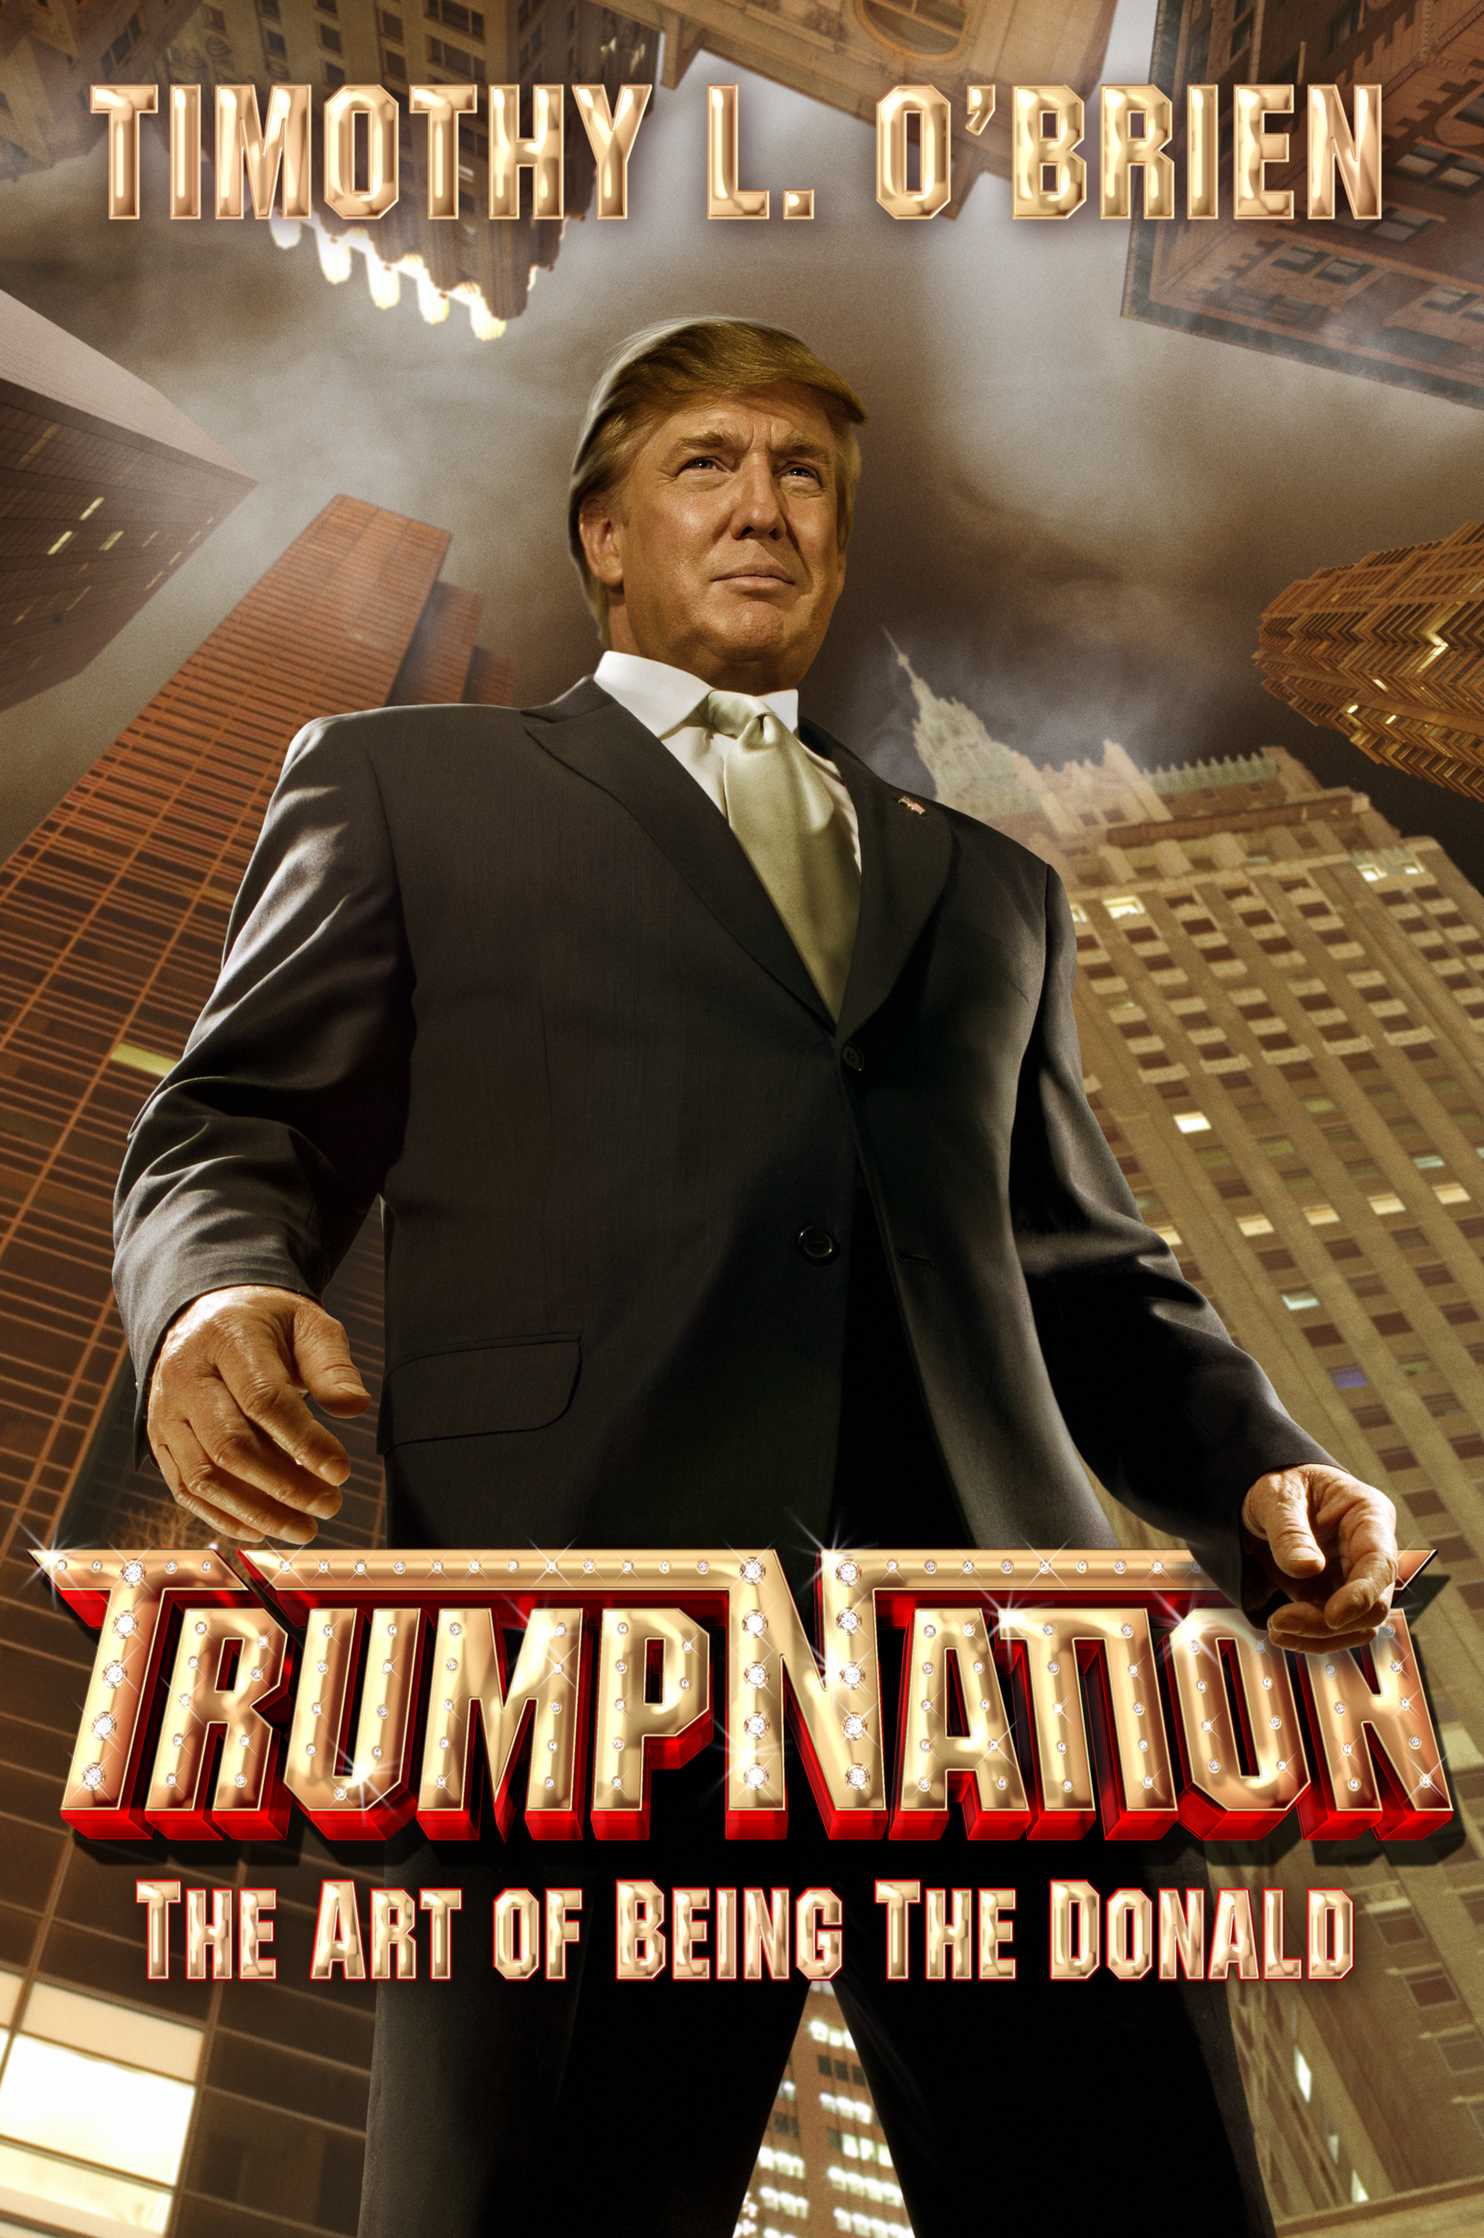 The cover of TrumpNation